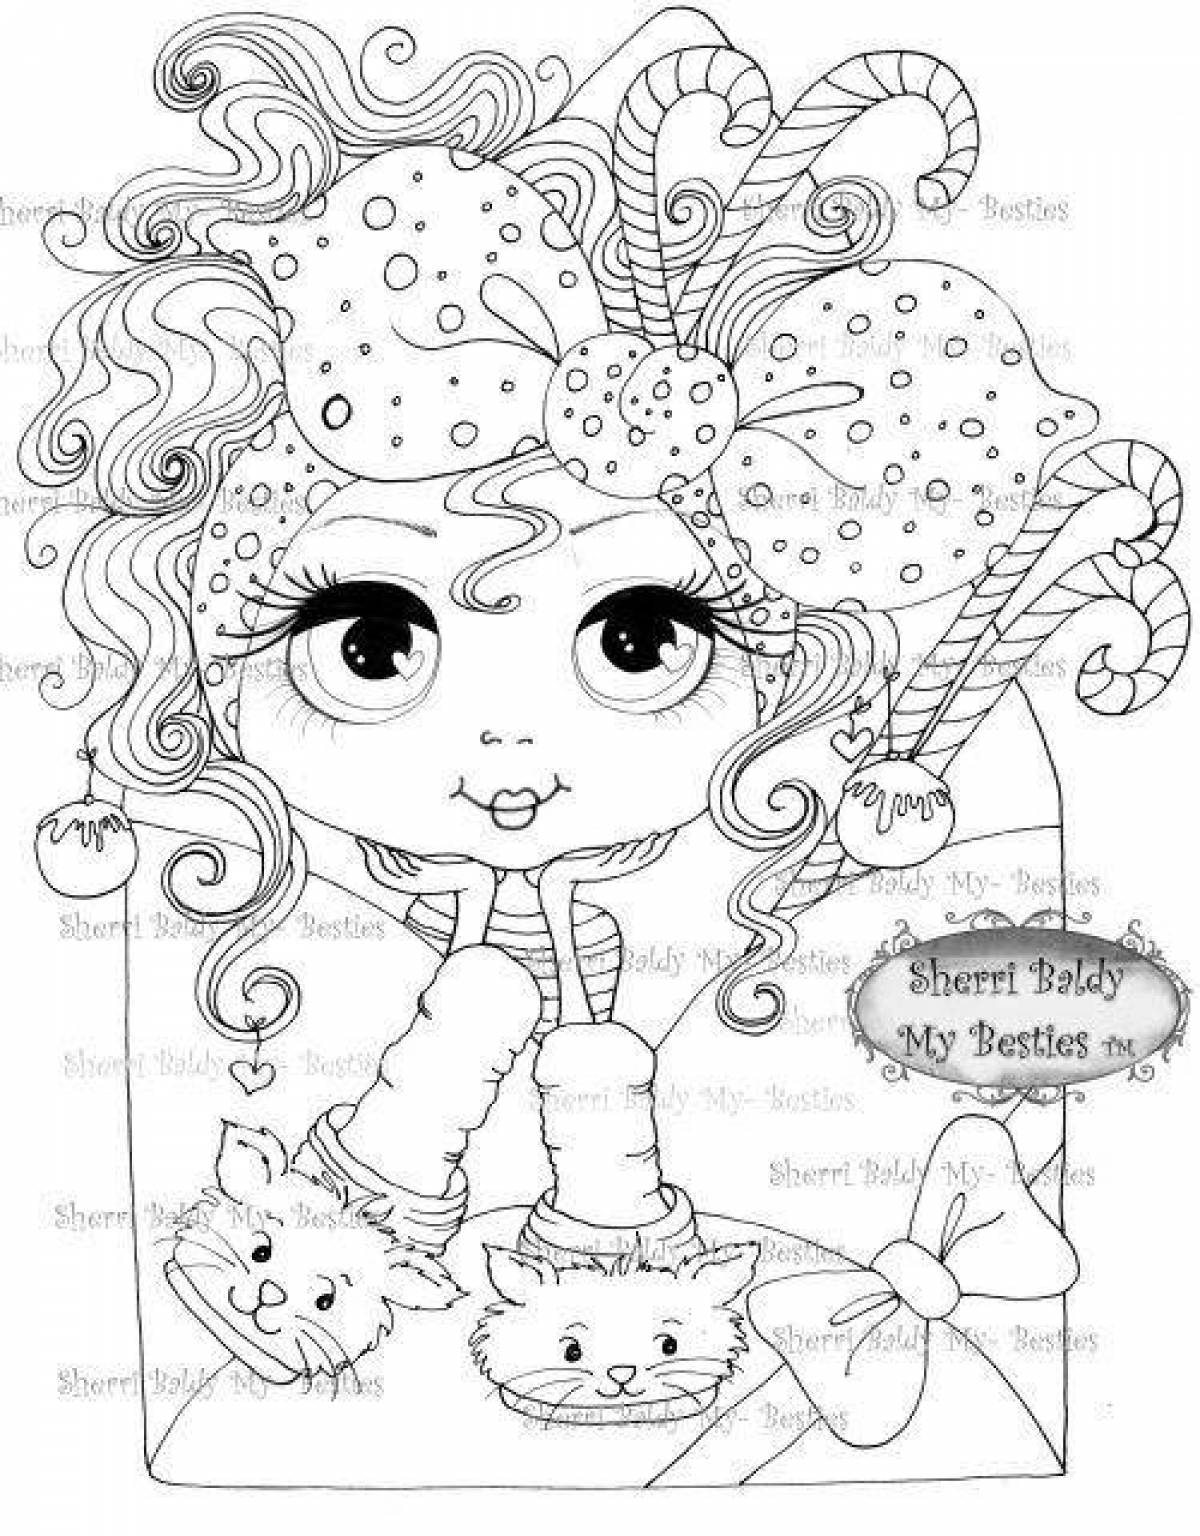 Colorful hobby line coloring page